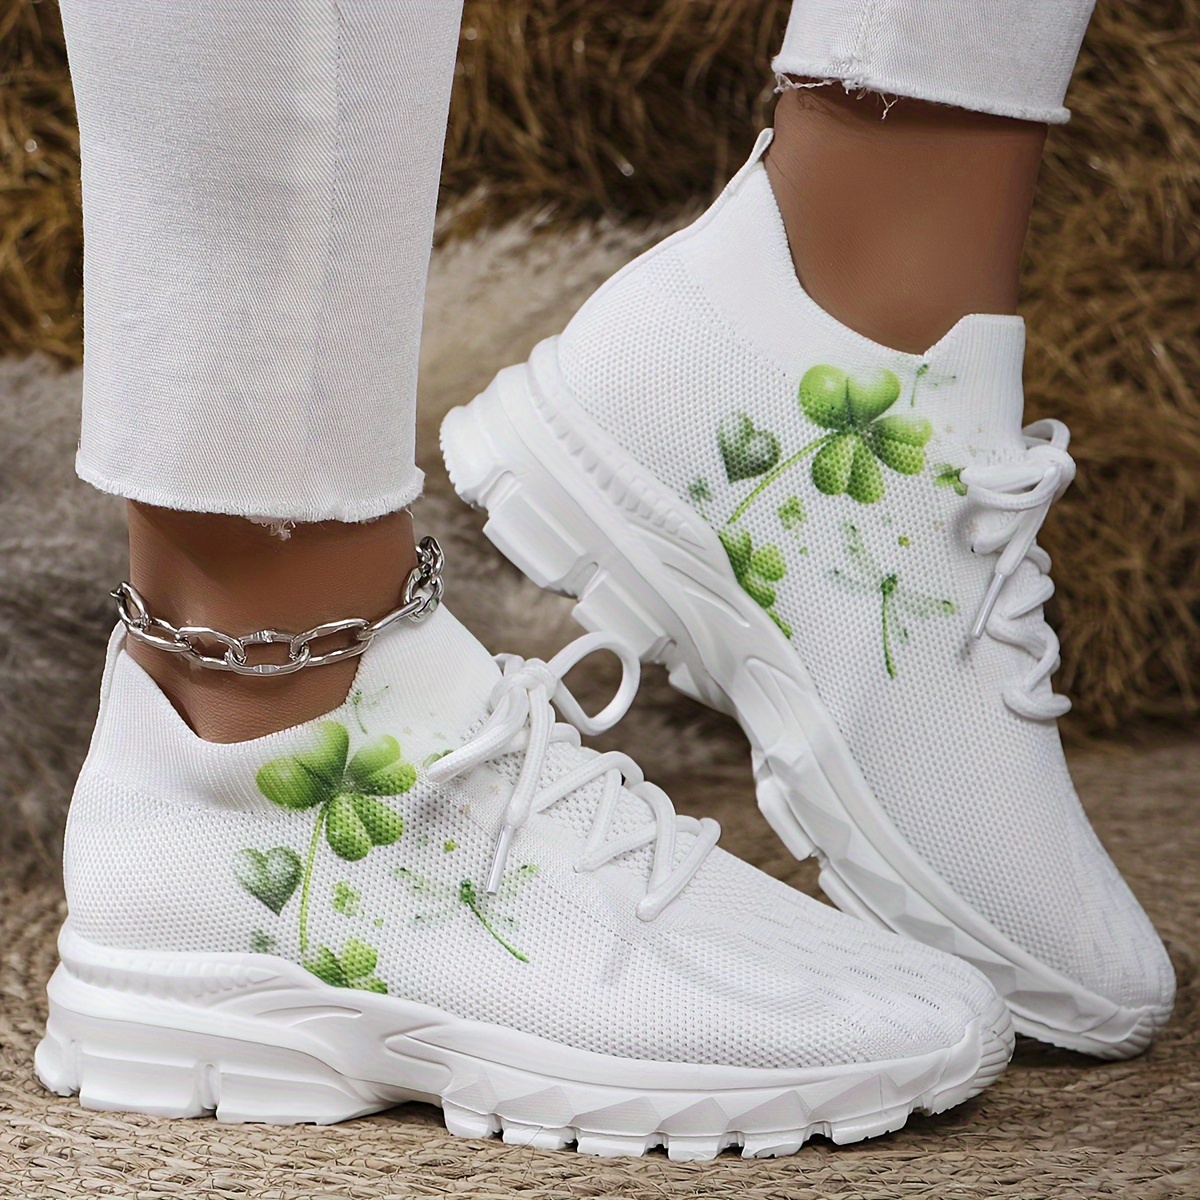 

Women's Clovers Pattern Sneakers, Breathable Low Top Walking Trainers, Comfy Outdoor Sports Shoes For St. Patrick's Day